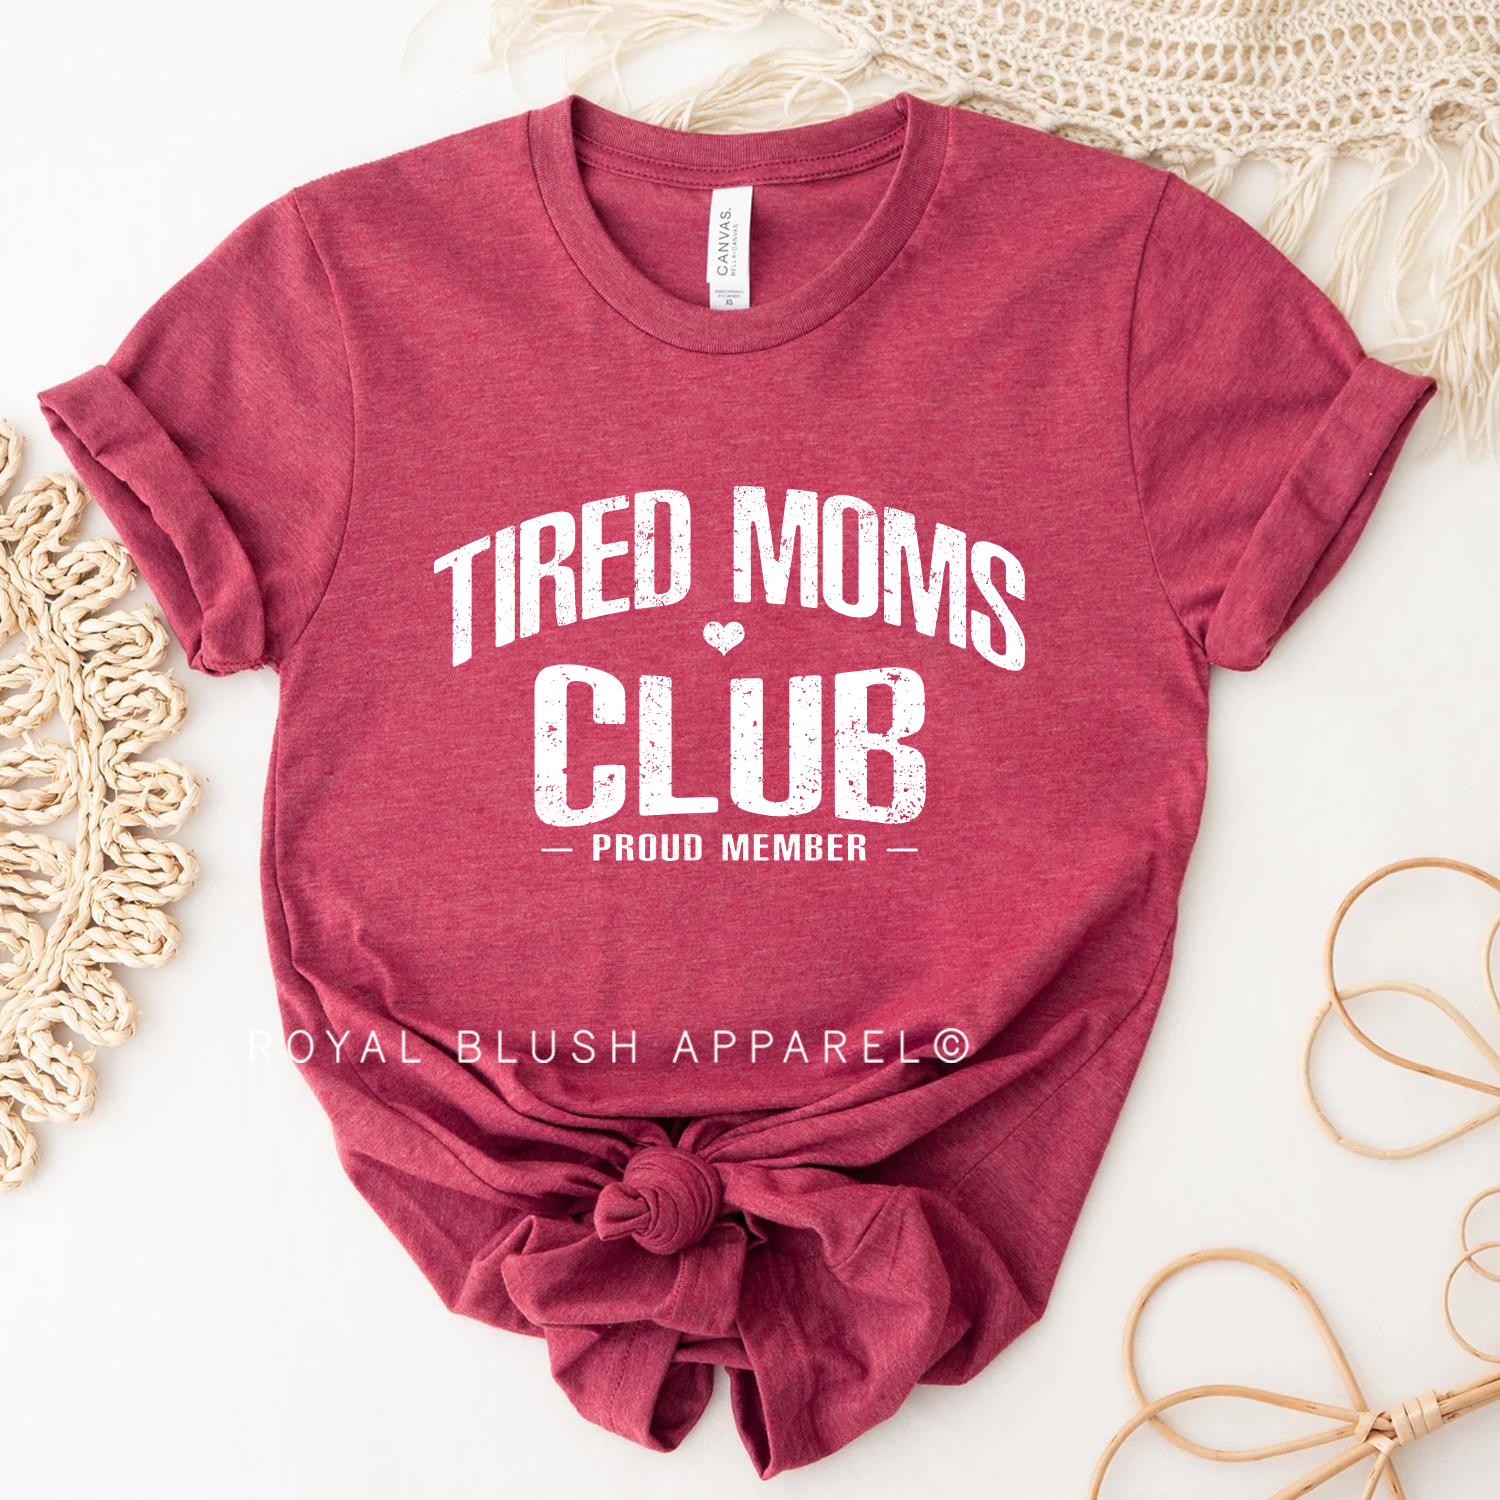 Tired Moms Club Relaxed Unisex T-shirt